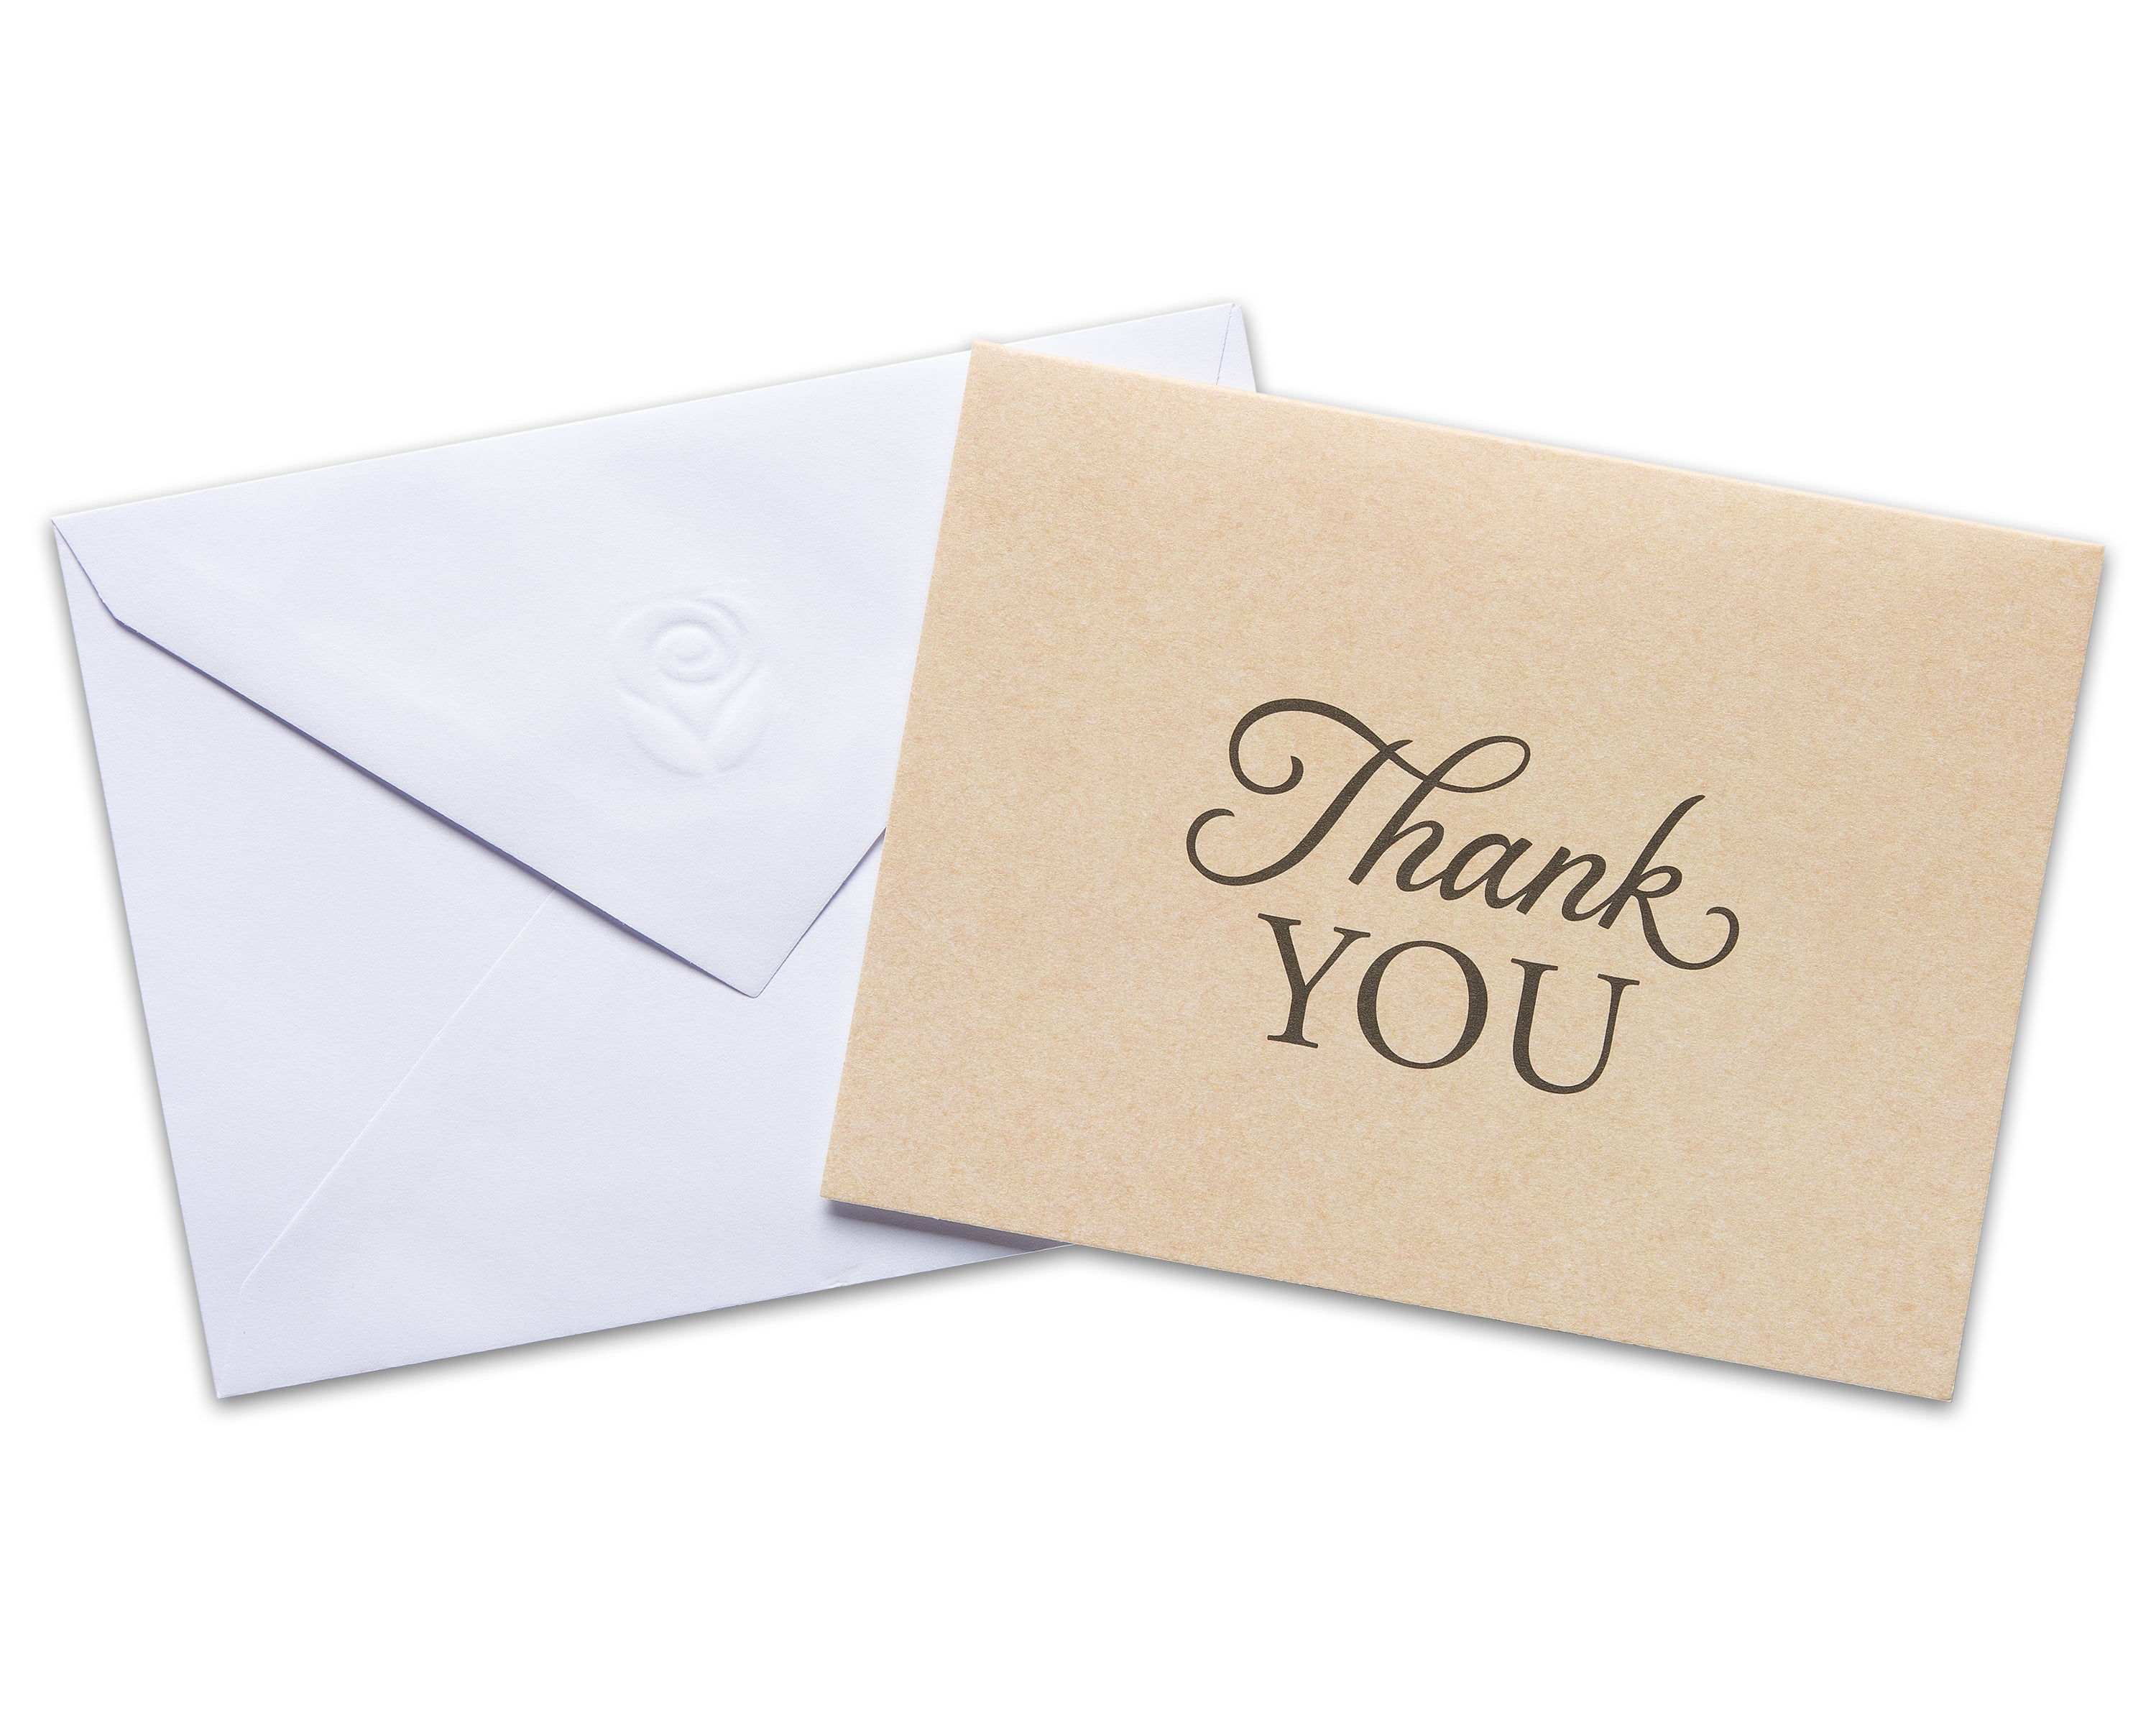 Gold Hot Stamped Greeting Cards Thank You Cards Pack of 100 With Envelopes 